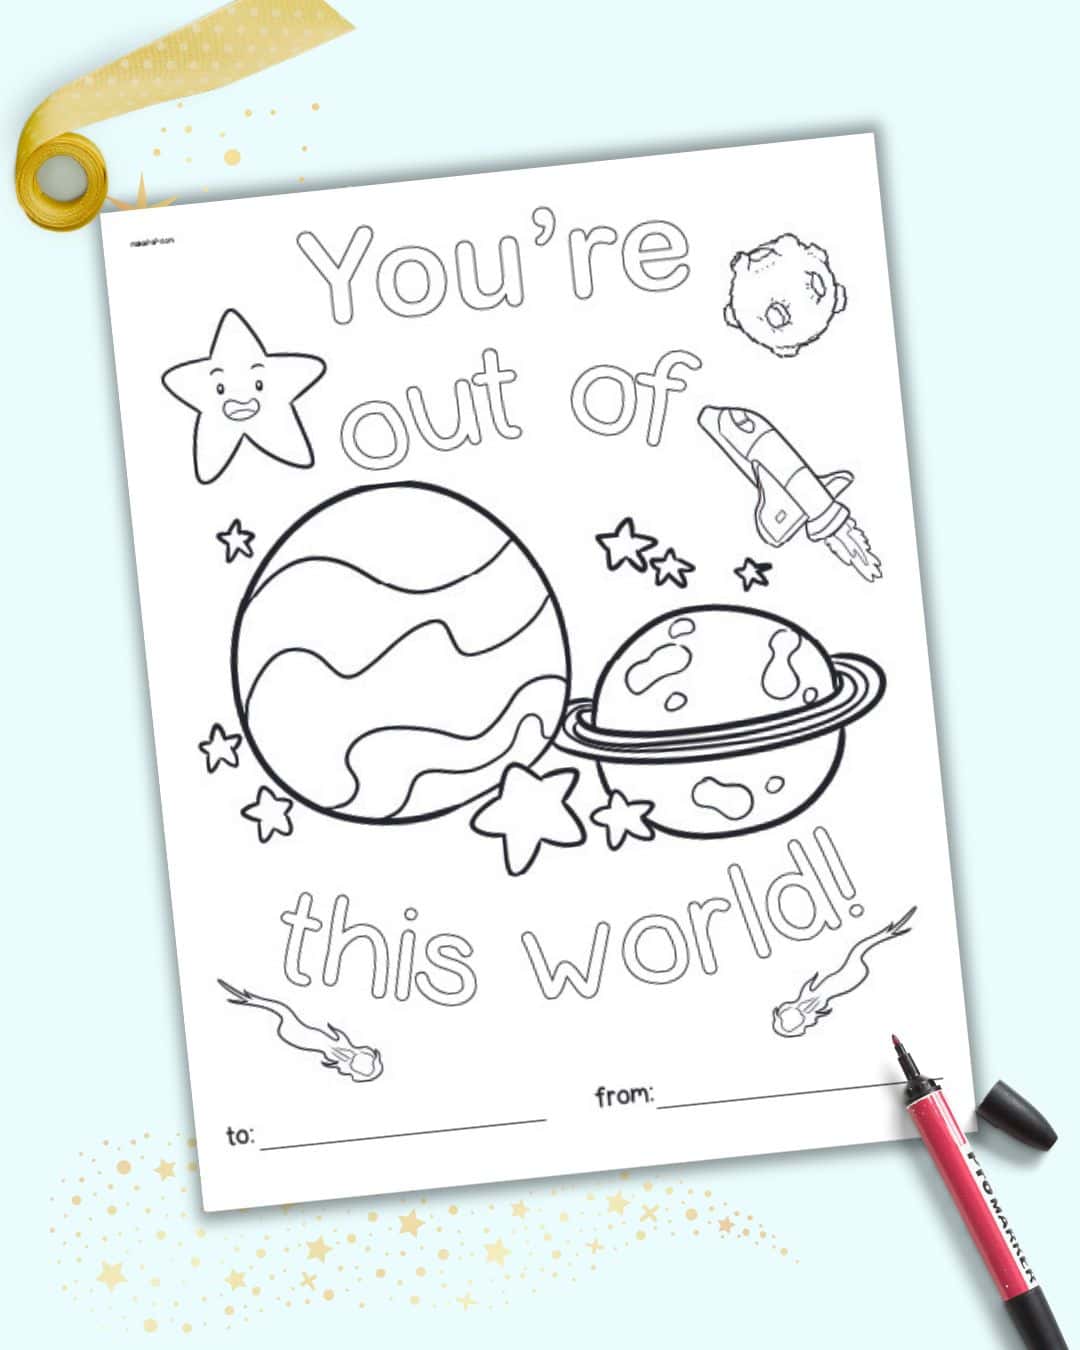 A preview of a coloring page with an outer space theme and the text "You're out of this world!"